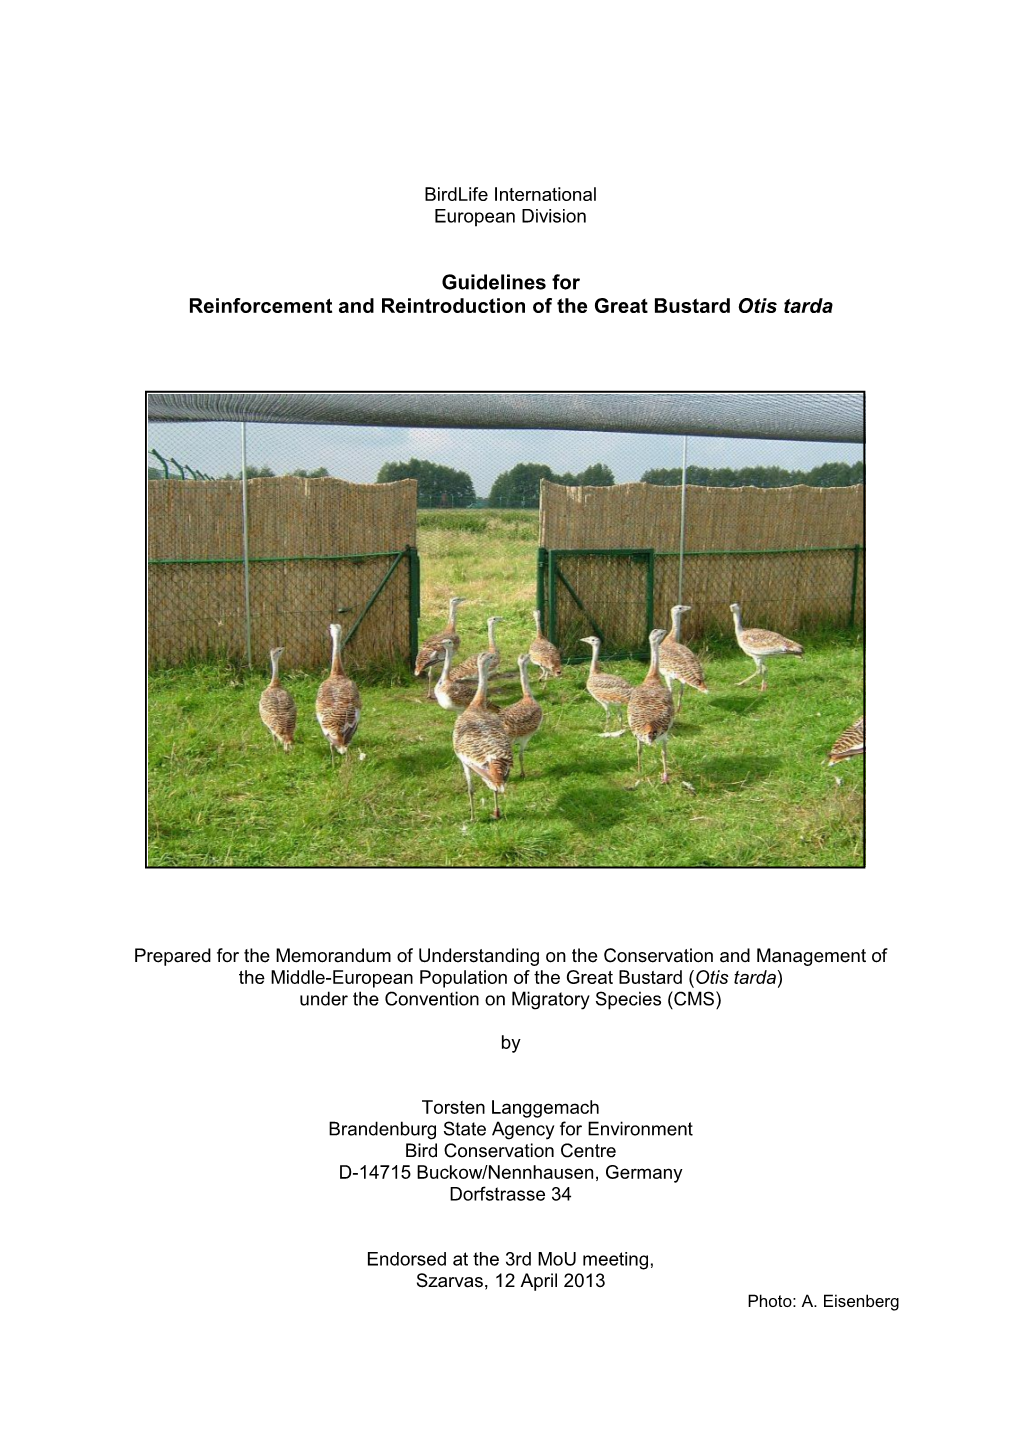 Guidelines for Reinforcement and Reintroduction of the Great Bustard Otis Tarda